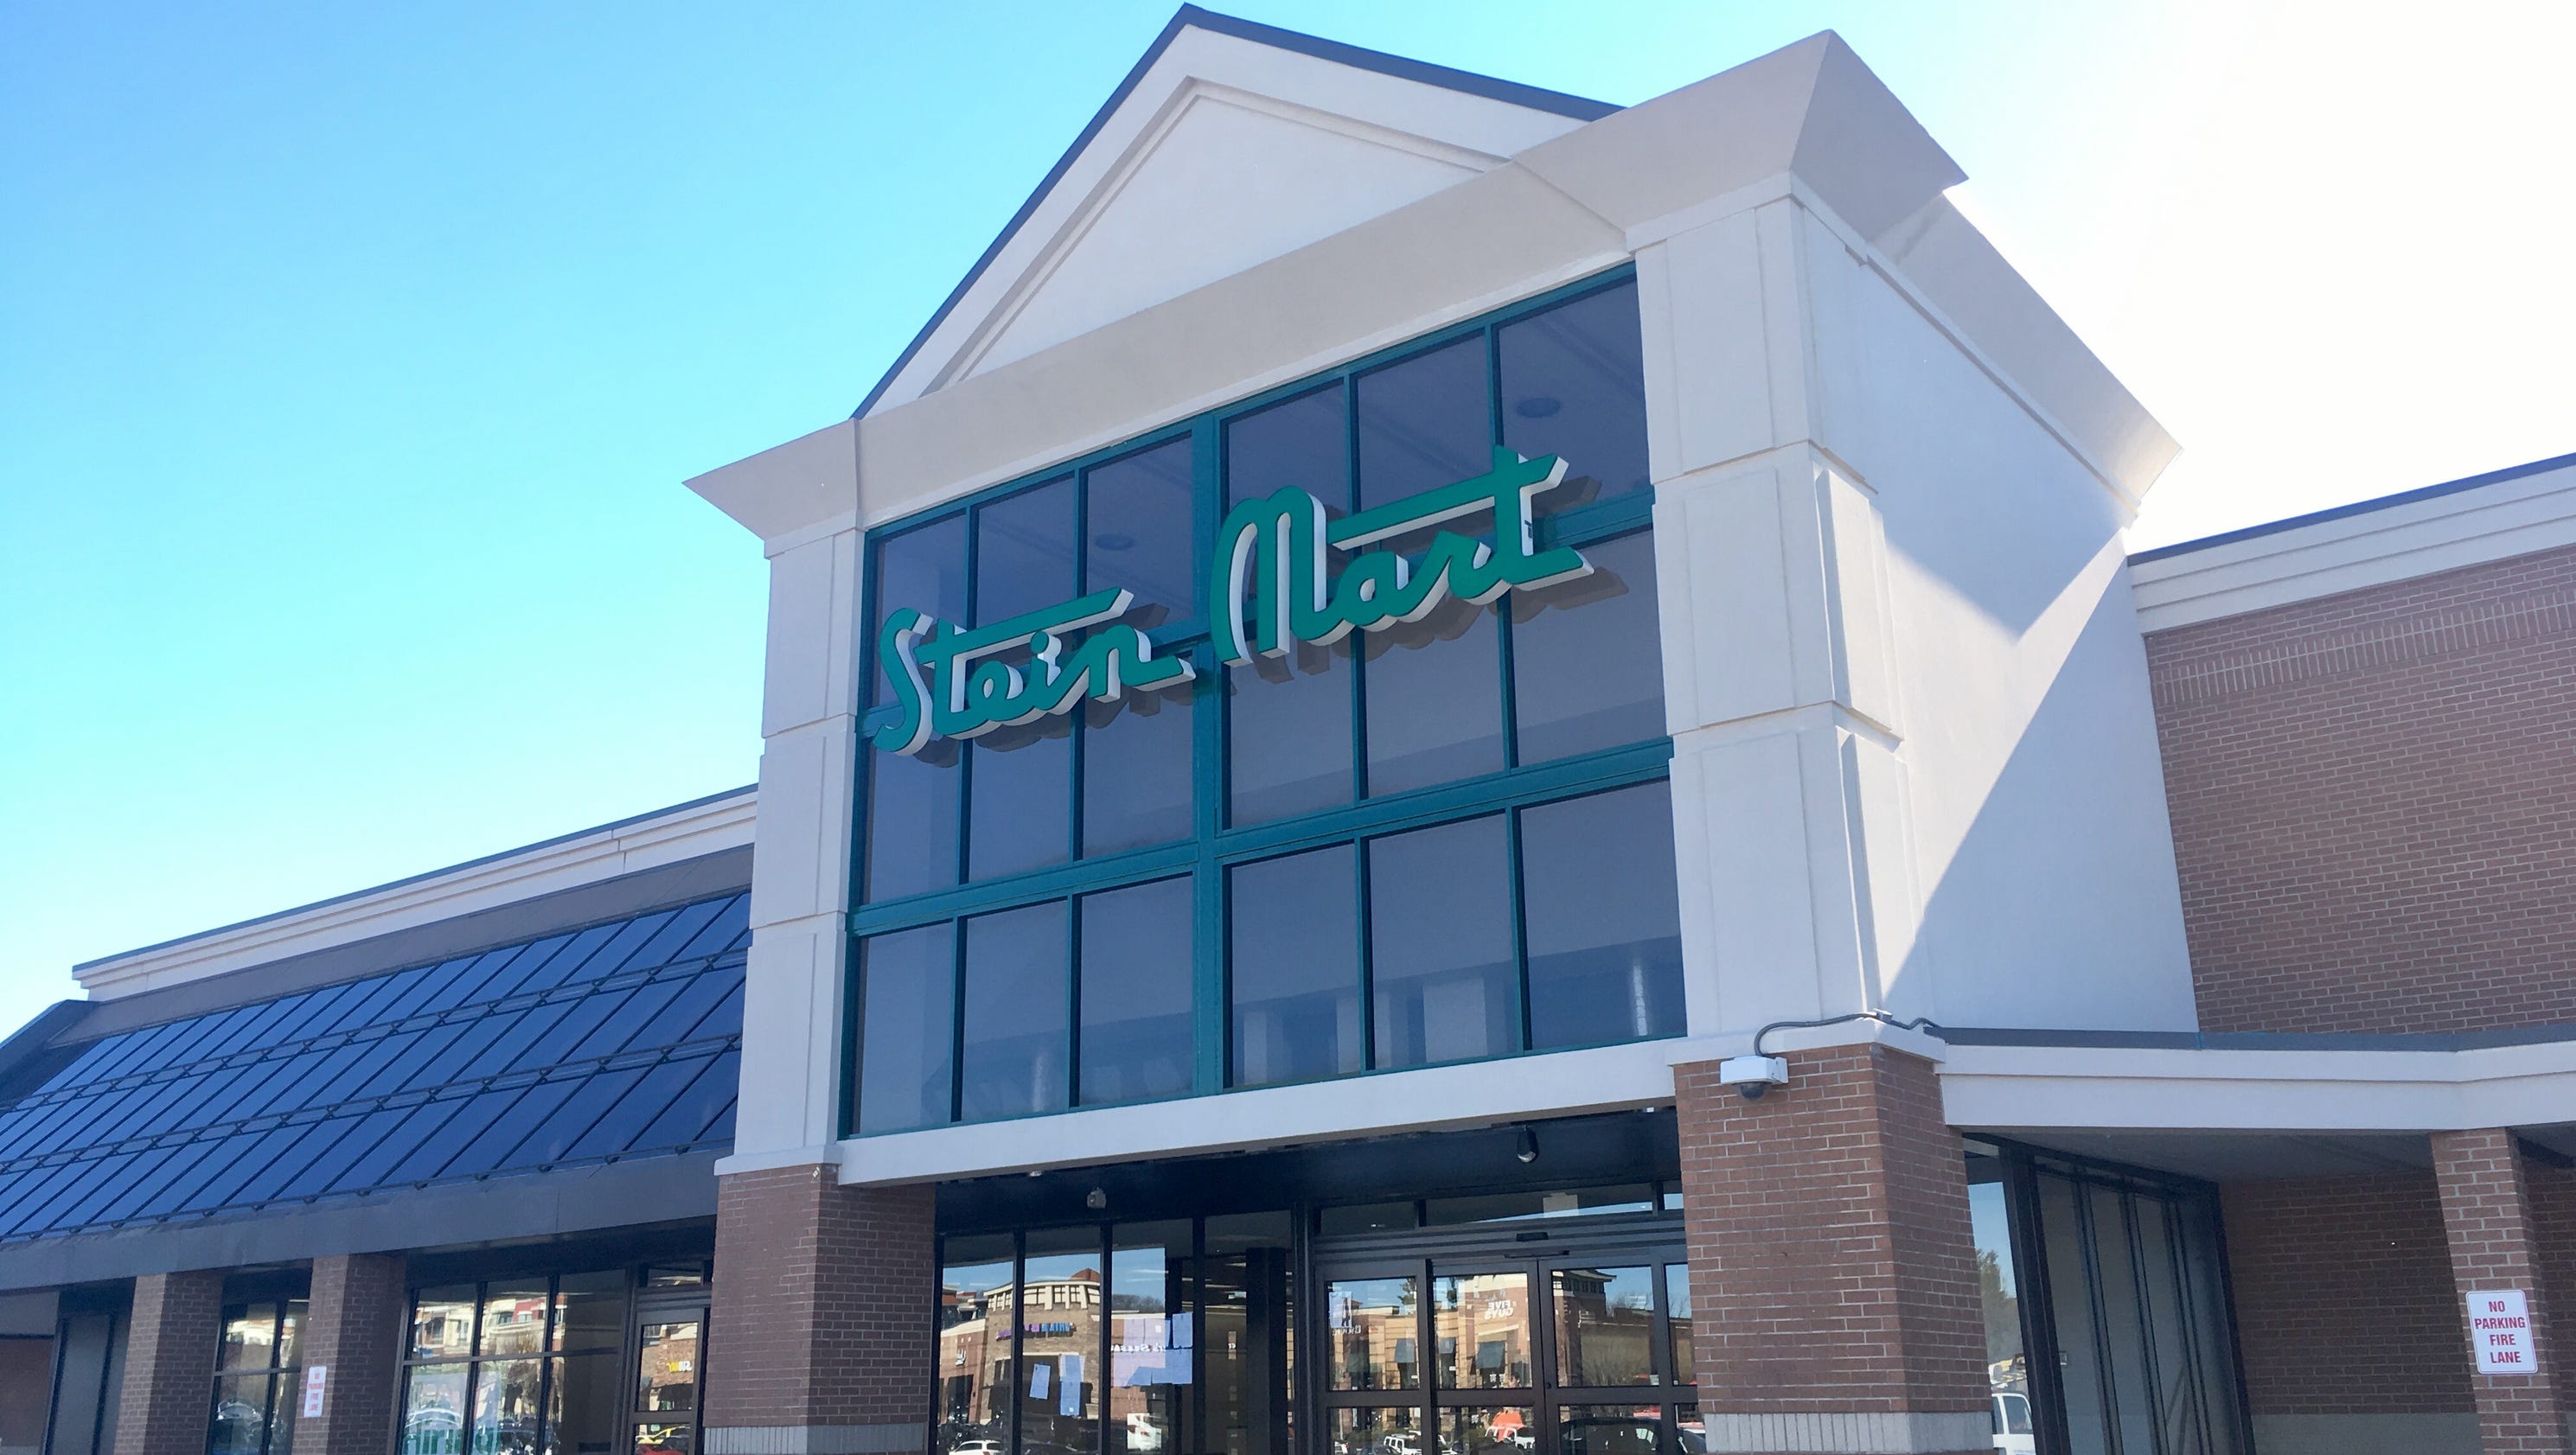 How do you locate local Stein Mart locations?